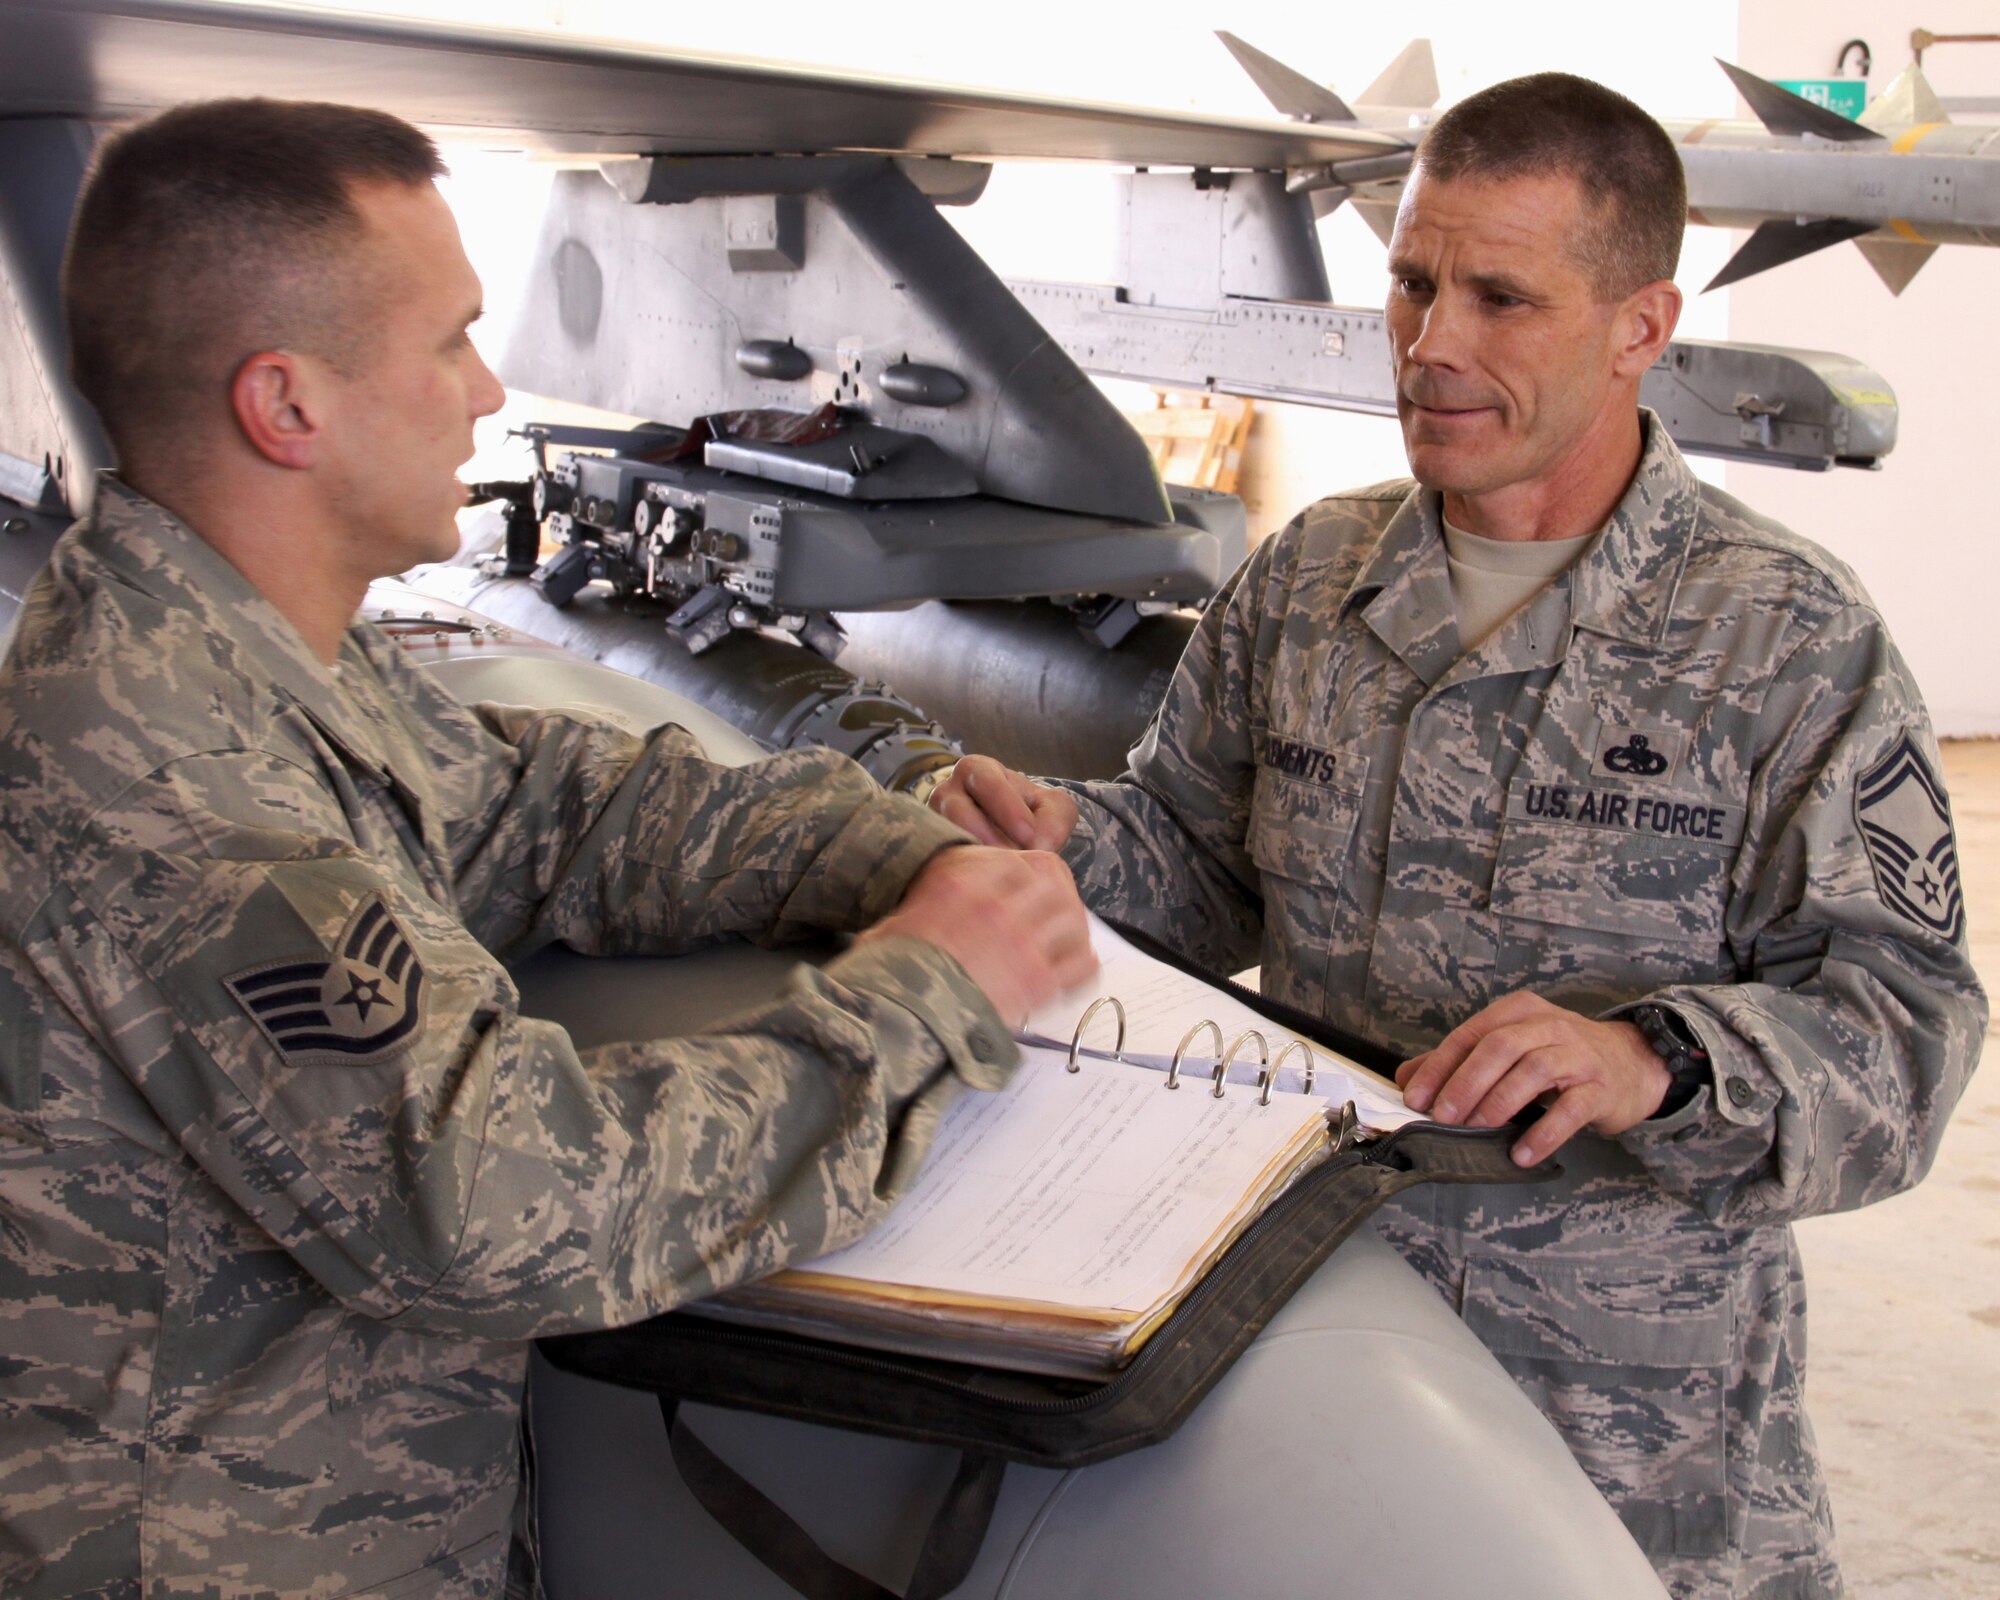 Senior Master Sgt. Scott Clements, right, 4th Aircraft Maintenance Unit productions supervisor, reviews forms with Staff Sgt. Brandon Howe, 332nd Expeditionary Aircraft Maintenance Squadron at Joint Base Balad, Iraq, March 2, 2009. Both are deployed to Balad from Hill Air Force Base, Utah. (U.S. Air Force photo/Tech. Sgt. Lionel Castellano)